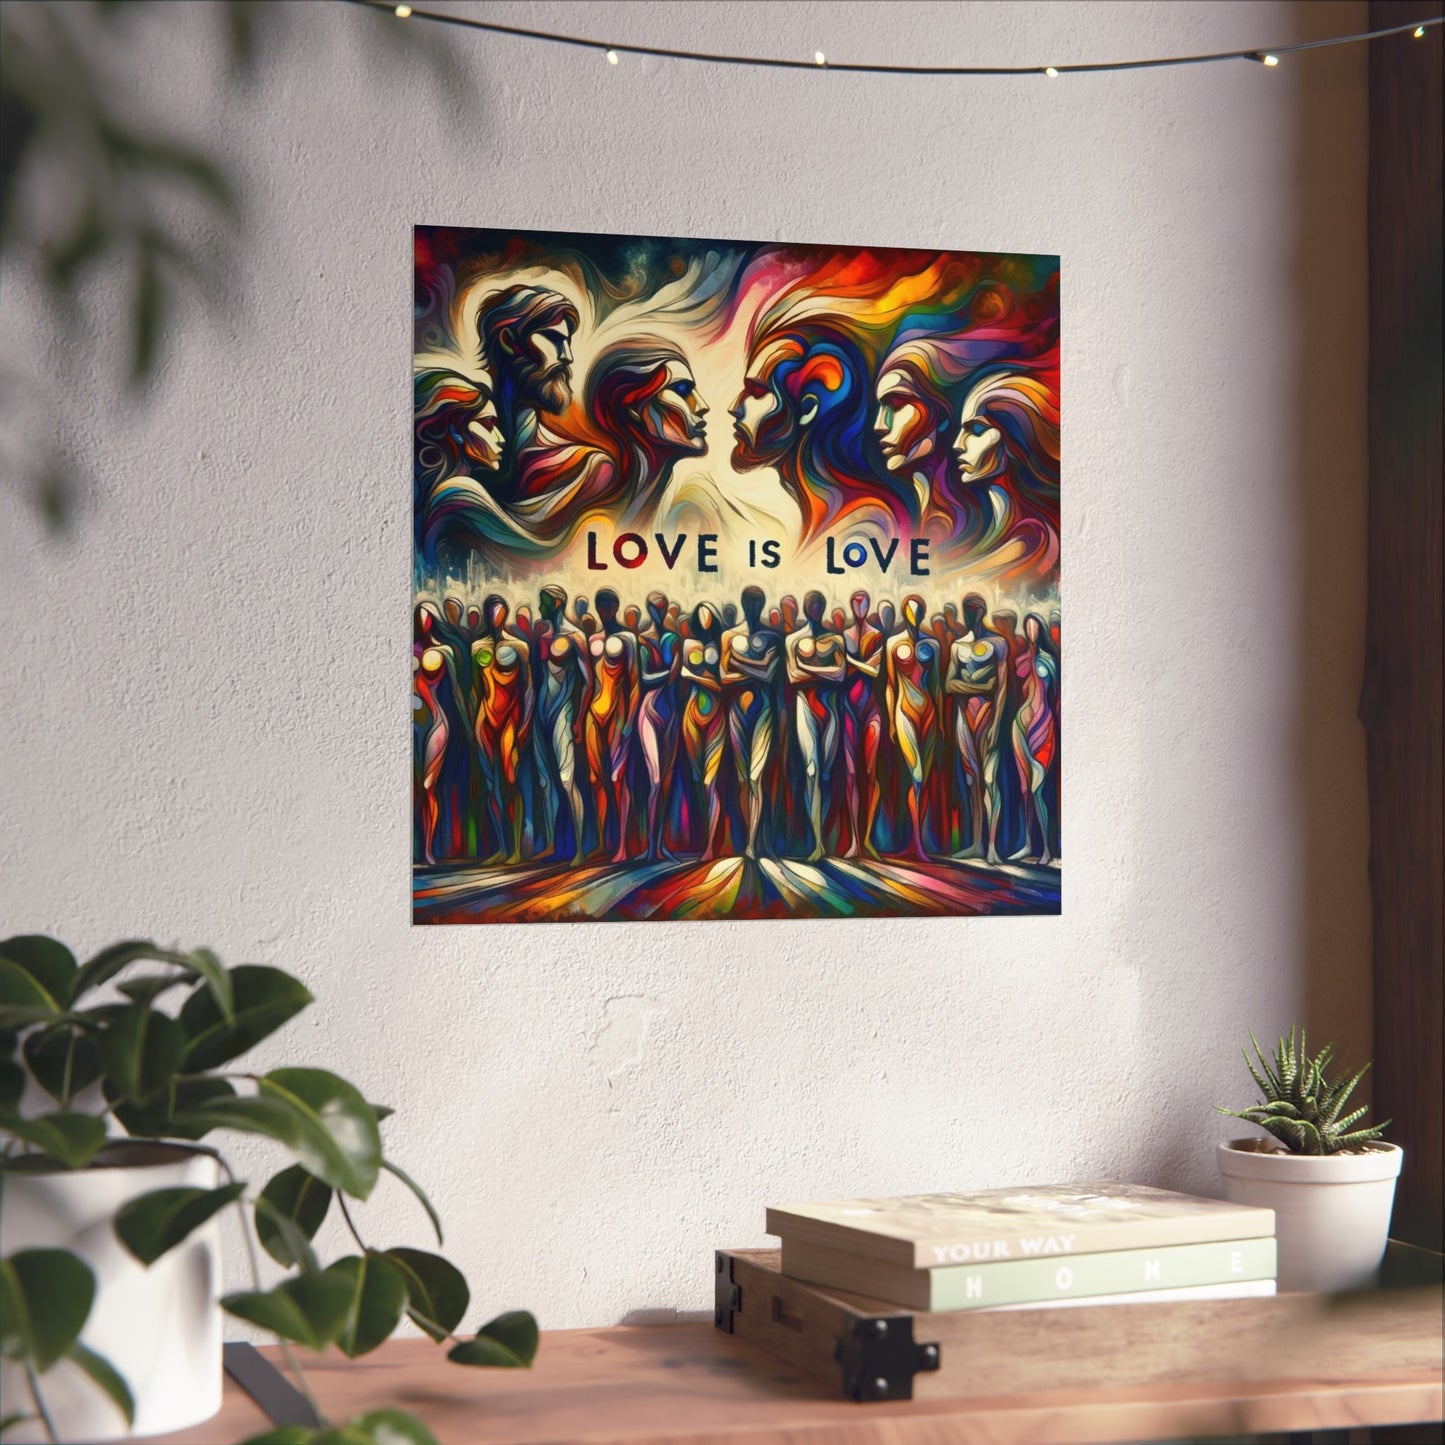 Gorgeous Statement Wall Art Poster: Love is Love! Expressionist Style Emotional Piece